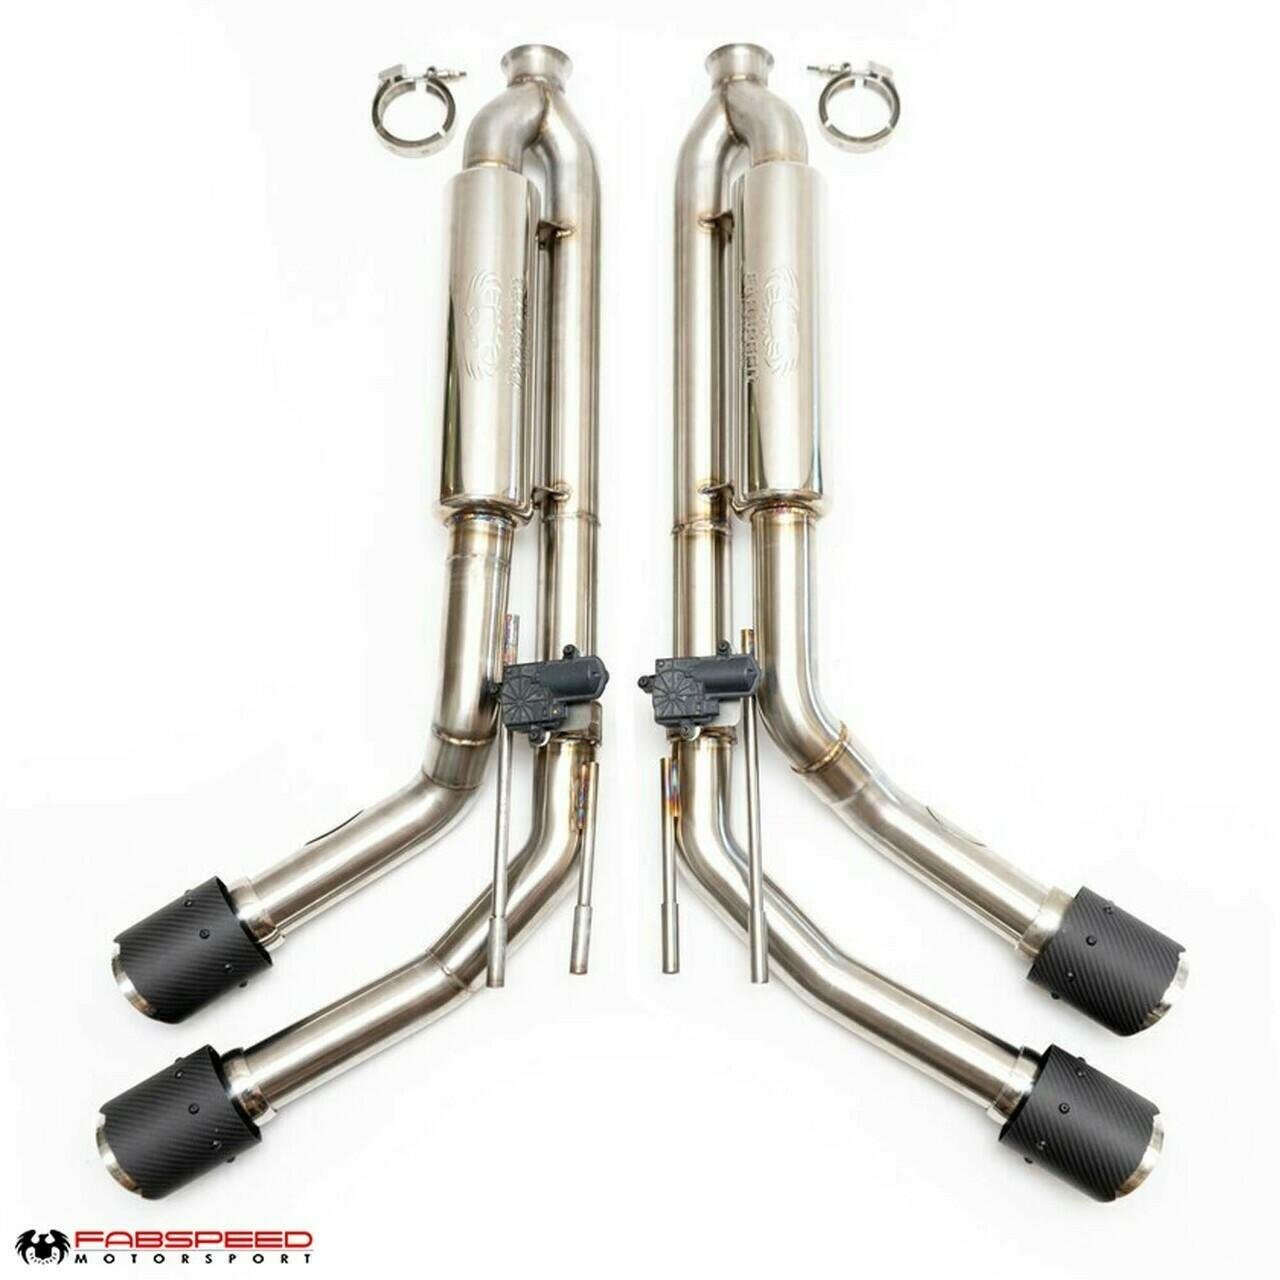 Fabspeed Mercedes-Benz G-Wagen G63 AMG Valvetronic Exhaust System with Quad Tips (2019+)